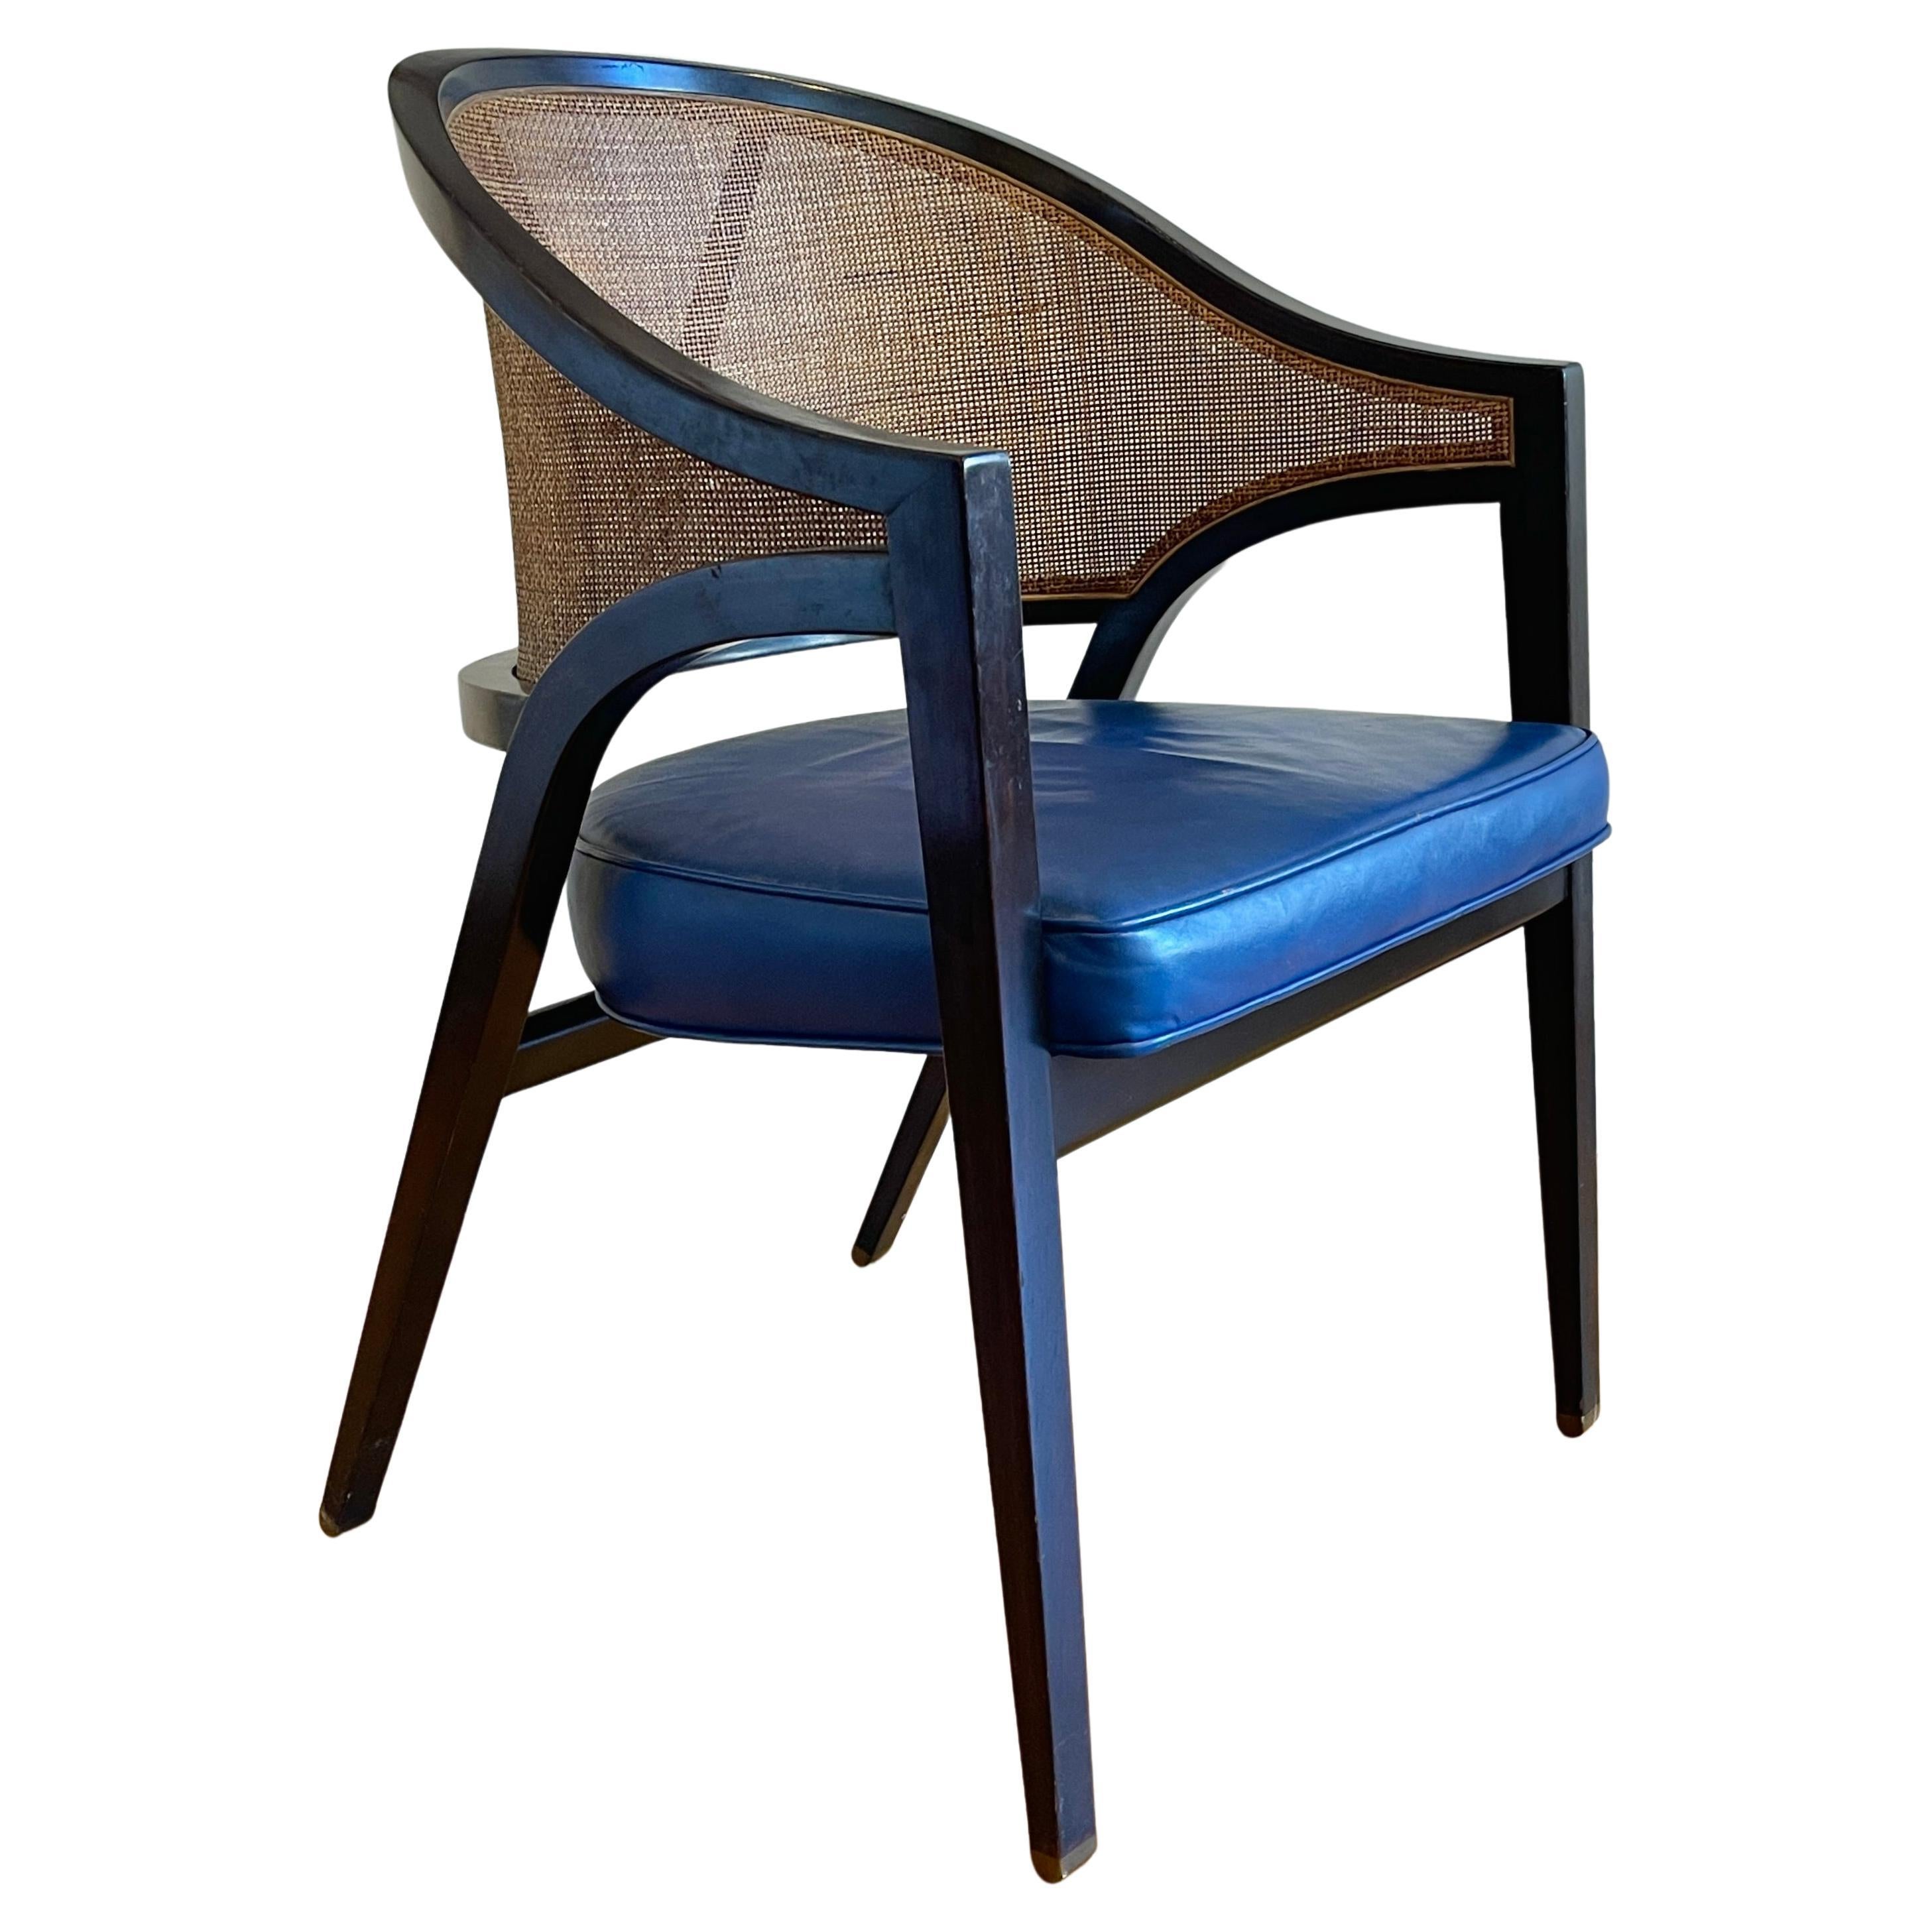 Incredible Caned Y back A-Frame Chair by Edward Wormley for Dunbar, C. 1950s